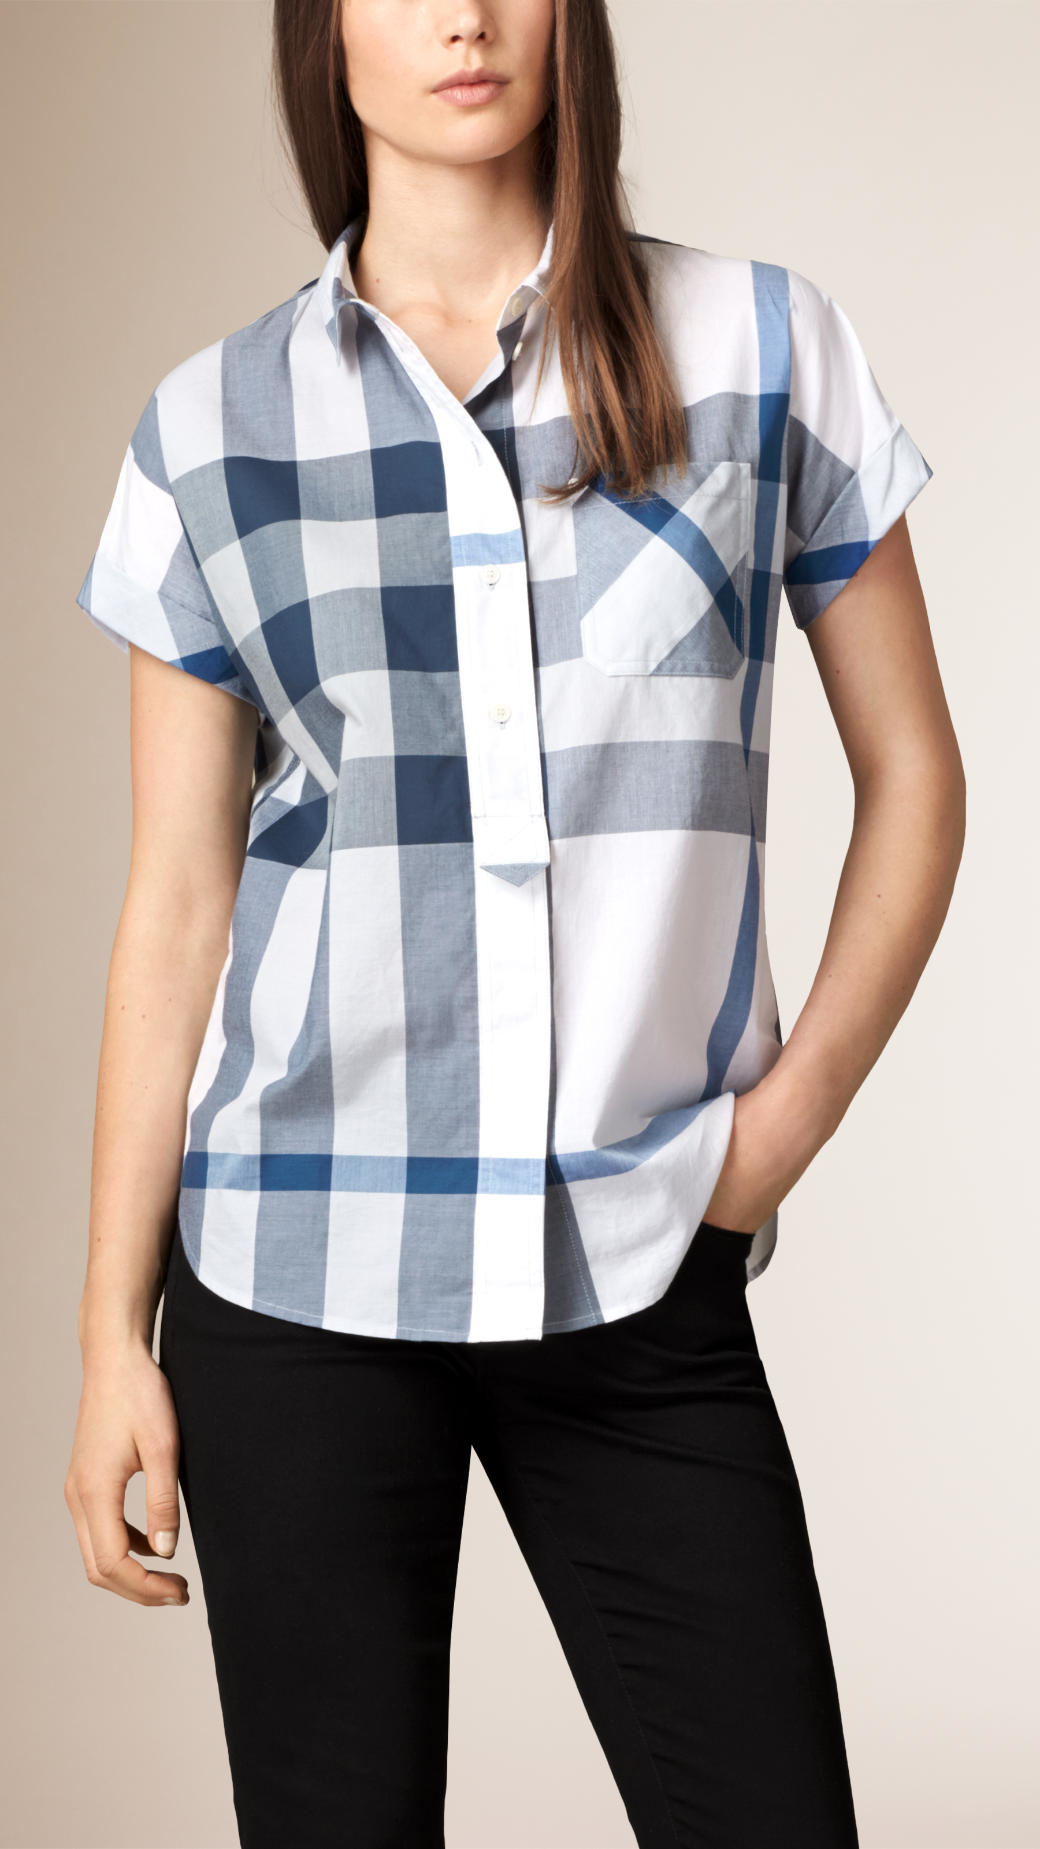 Lyst - Burberry Exploded Check Cotton Voile Shirt in Blue